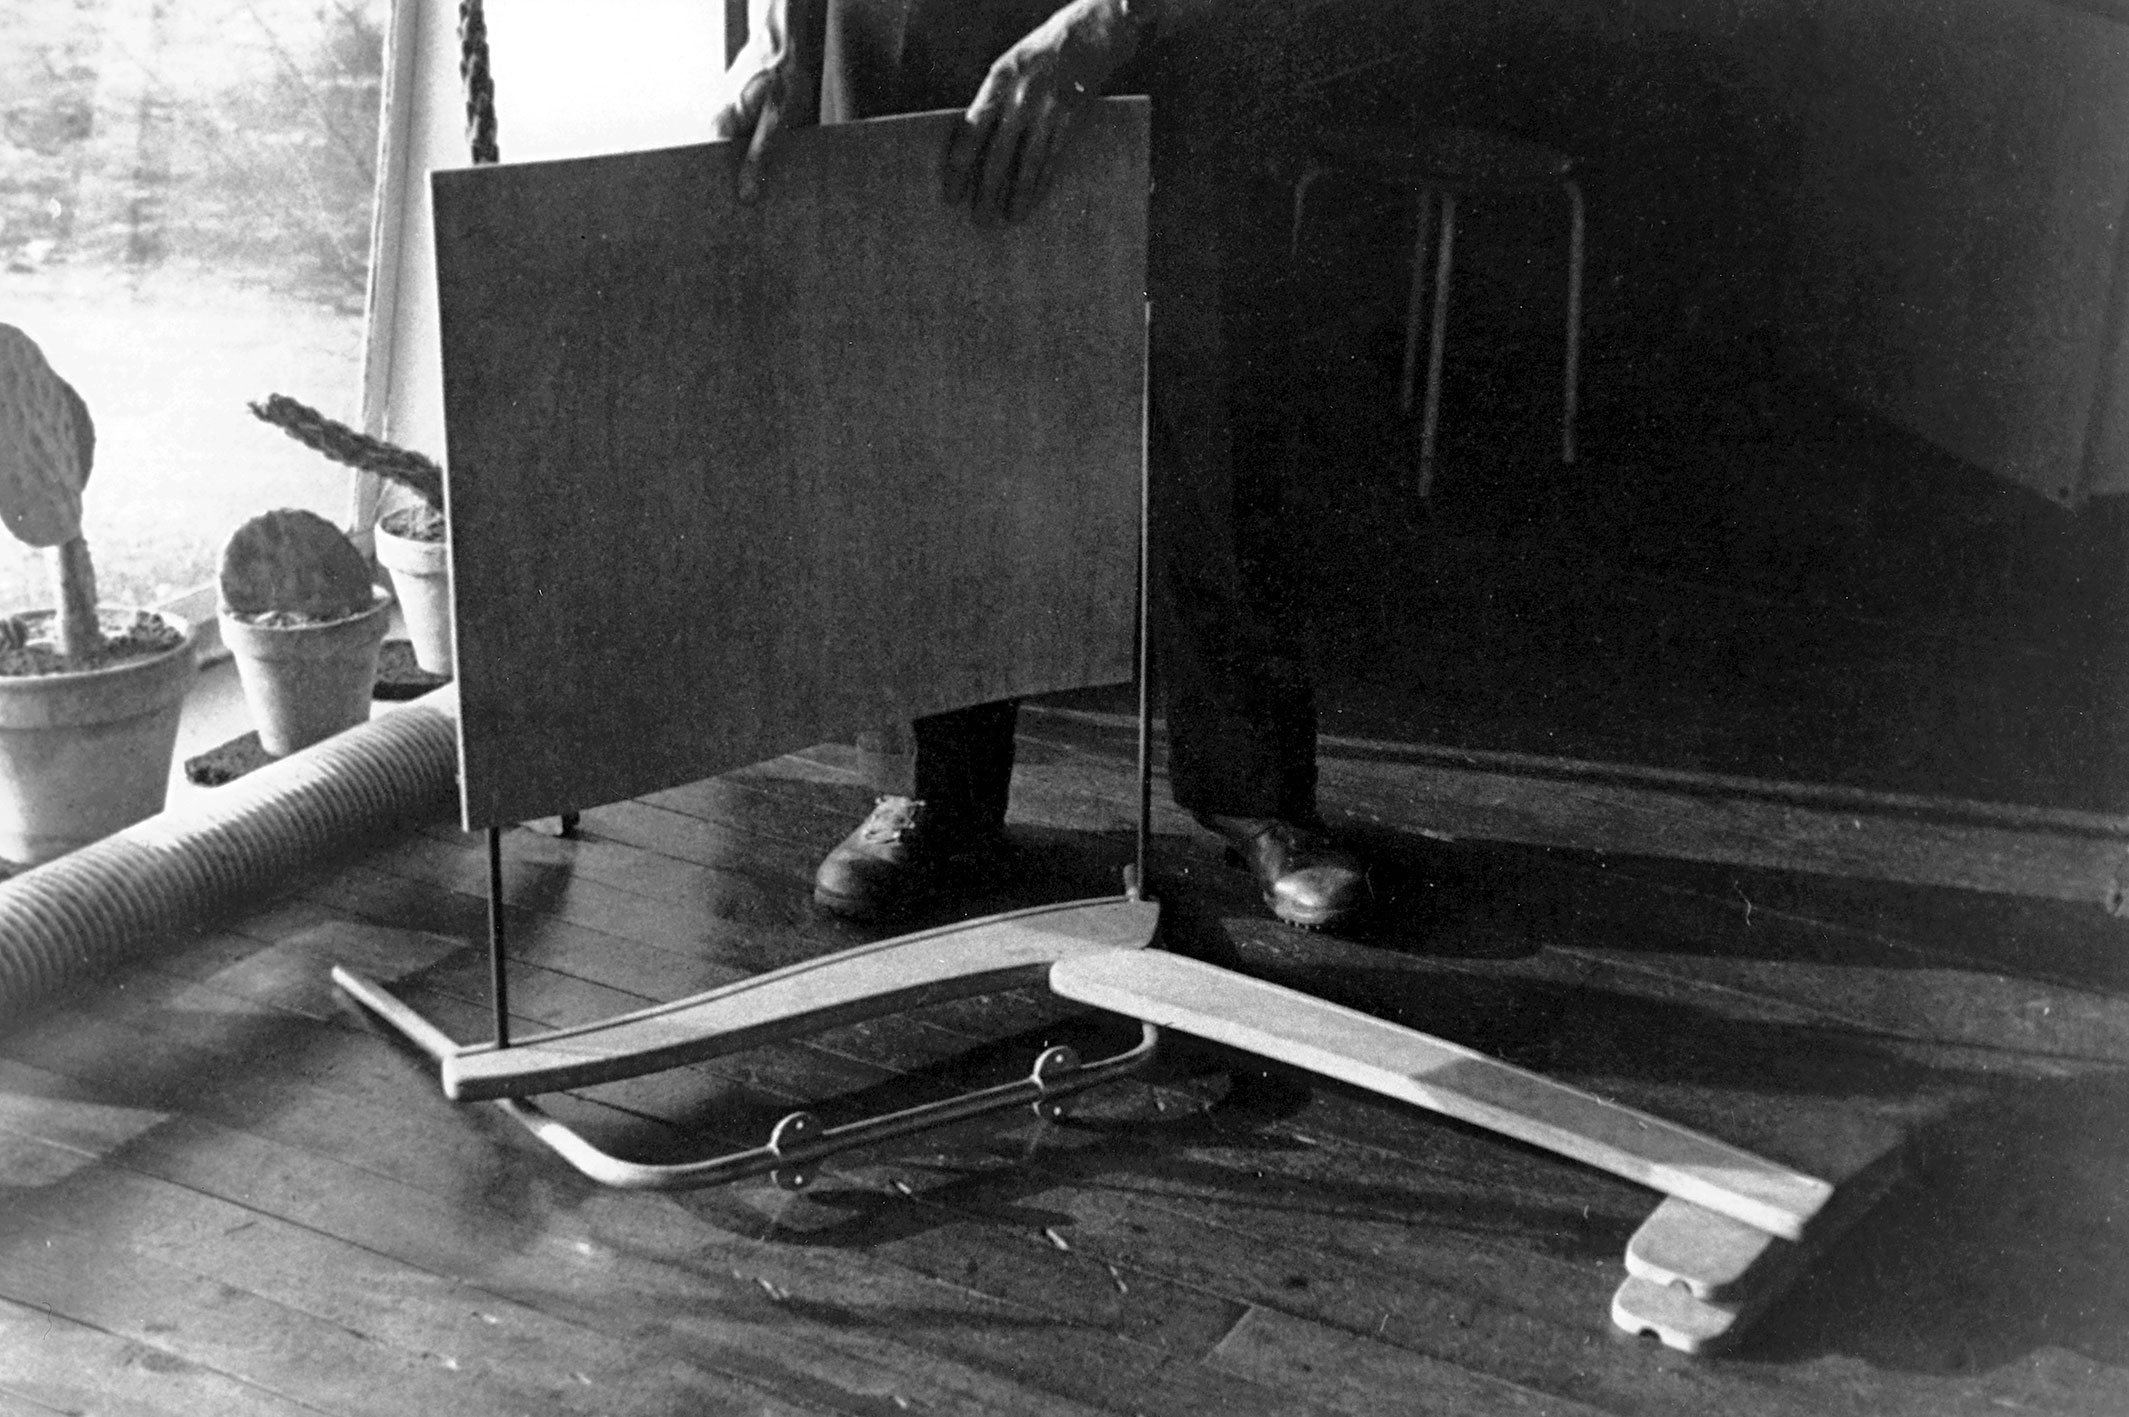 Visiteur Métropole FV 12 armchair. Demonstration of assemblage by André Le Stang, employee of the Ateliers Jean Prouvé, in Jean Prouvé’s office in Maxéville, ca. 1949.